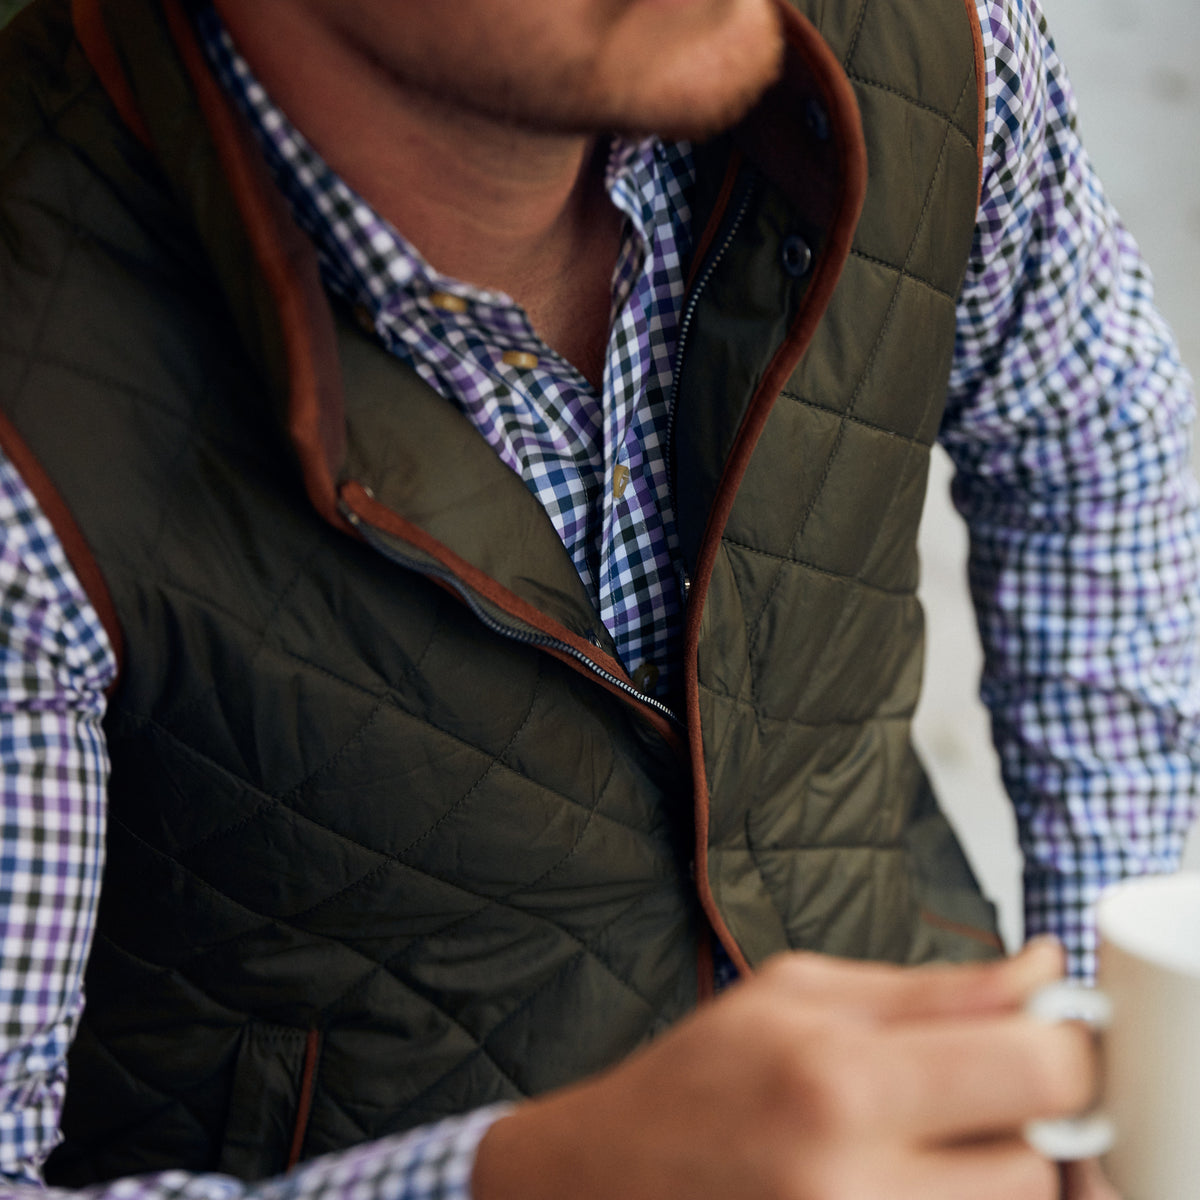 Saturday morning to Saturday night, The Sportsman was designed with interior pockets for all your gear. Get ready for the outdoors and good times!   100% Polyester Quilted Vest • Soft Fleece Interior • Full Front Hidden Zip with Snap Button Closure • Four Inside Utility Pockets • Machine Wash • Imported